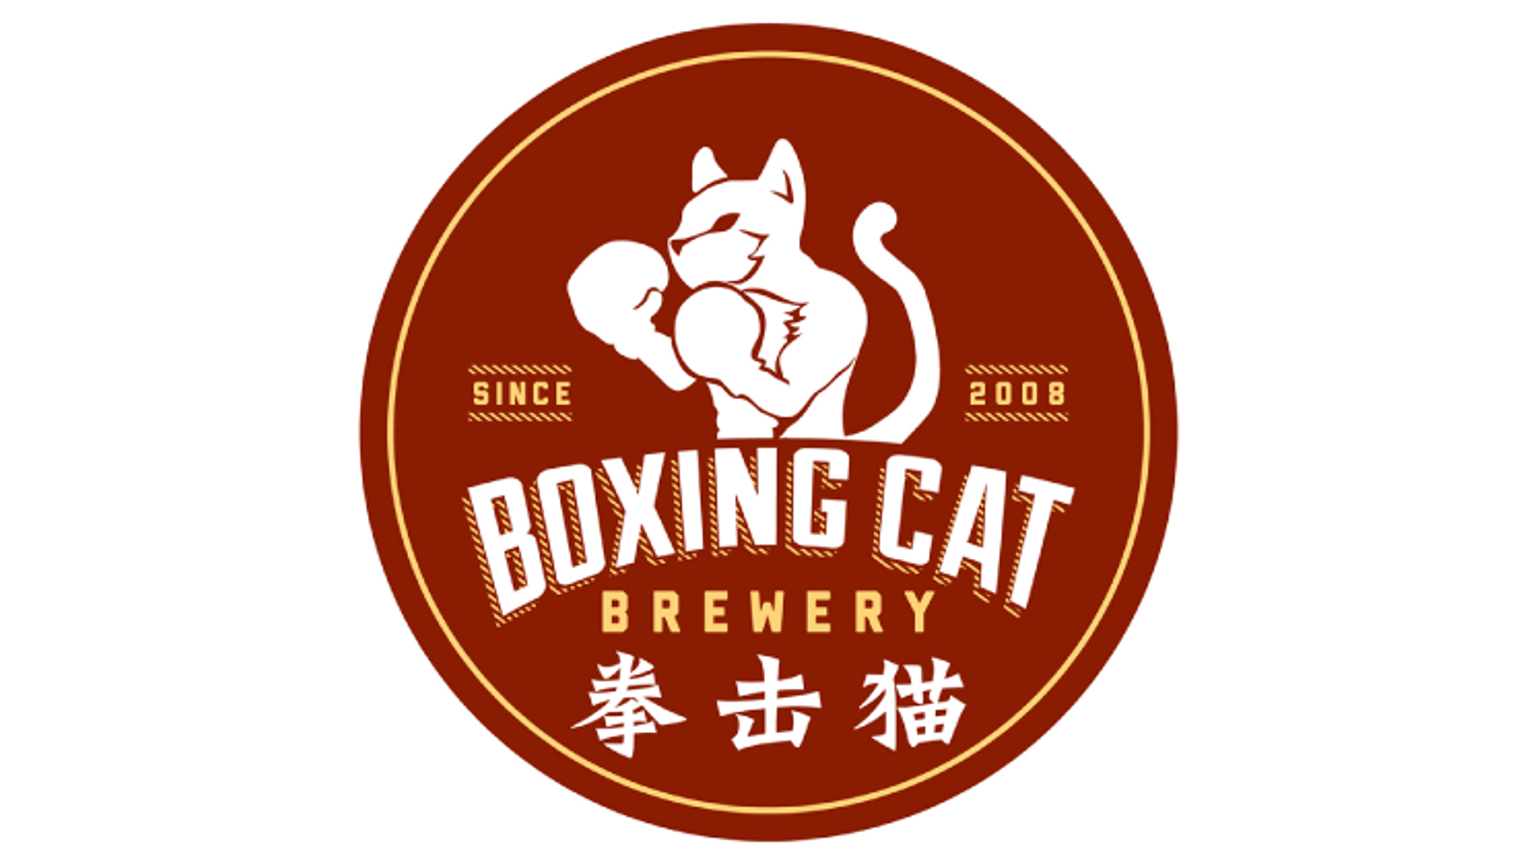 thumbnail for blog article named: Ringside Red - Boxing Cat Brewery